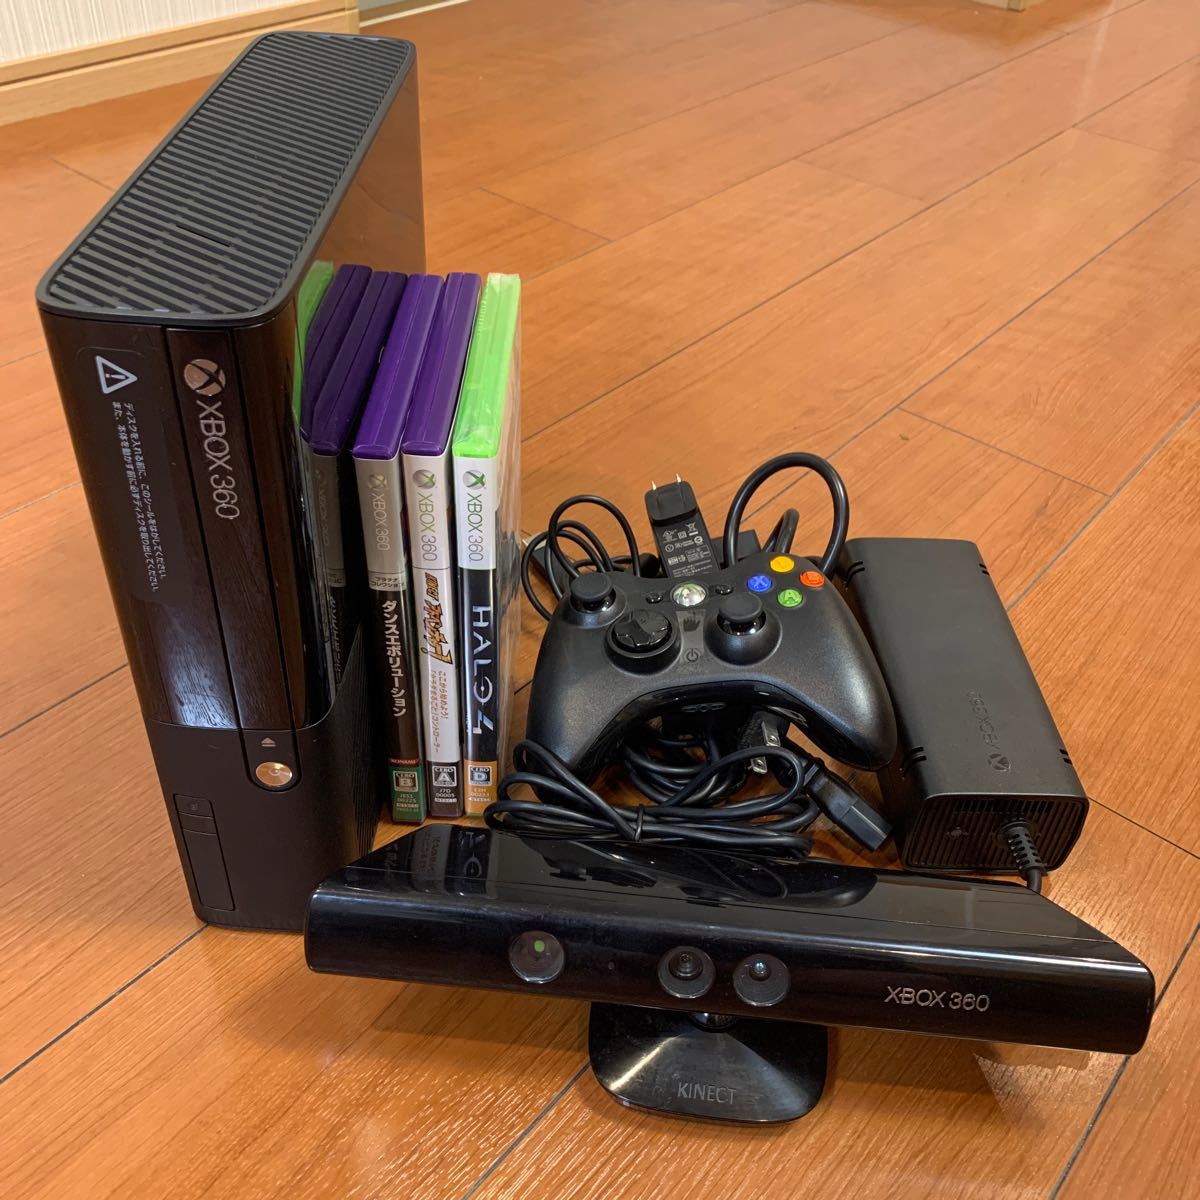 XBOX360 E CONSOLE 1538 Microsoft Kinect ソフト コントローラー ケーブル類 セット